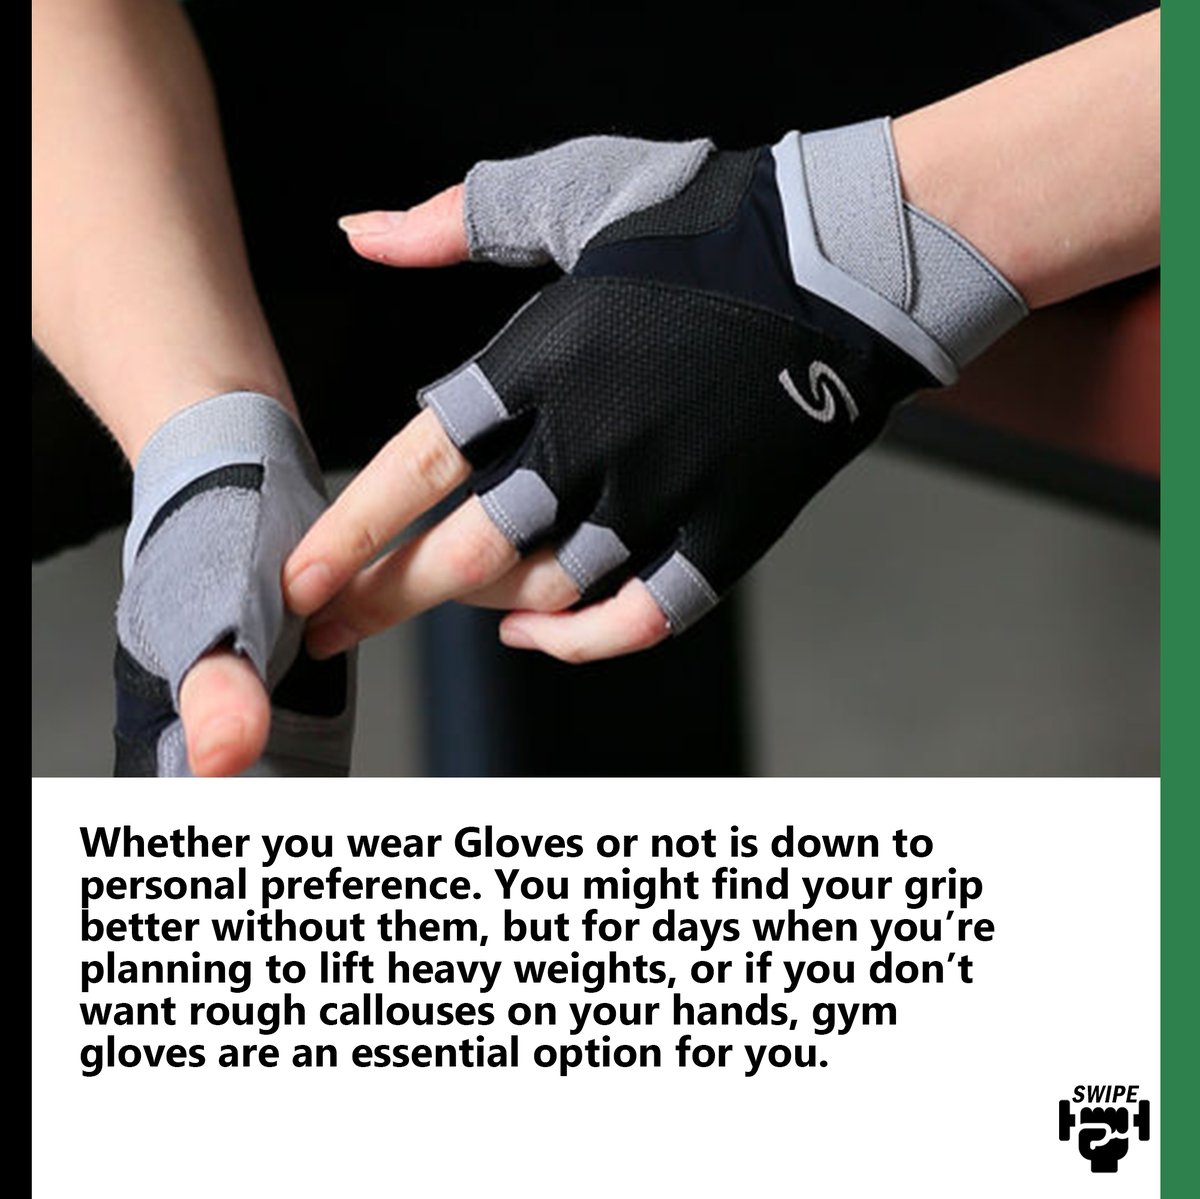 Should you Wear Gloves while Working Out?

#dietnfit #physicalexercise #fitness #gym #gymtips #workouttips #workout #facts #funfacts #workoutmotivation #fitnessmotivation #exercise #fitwithdnf #eathealthy #regularexercise #facts #gloves  #virtualreality #fitnessstudio